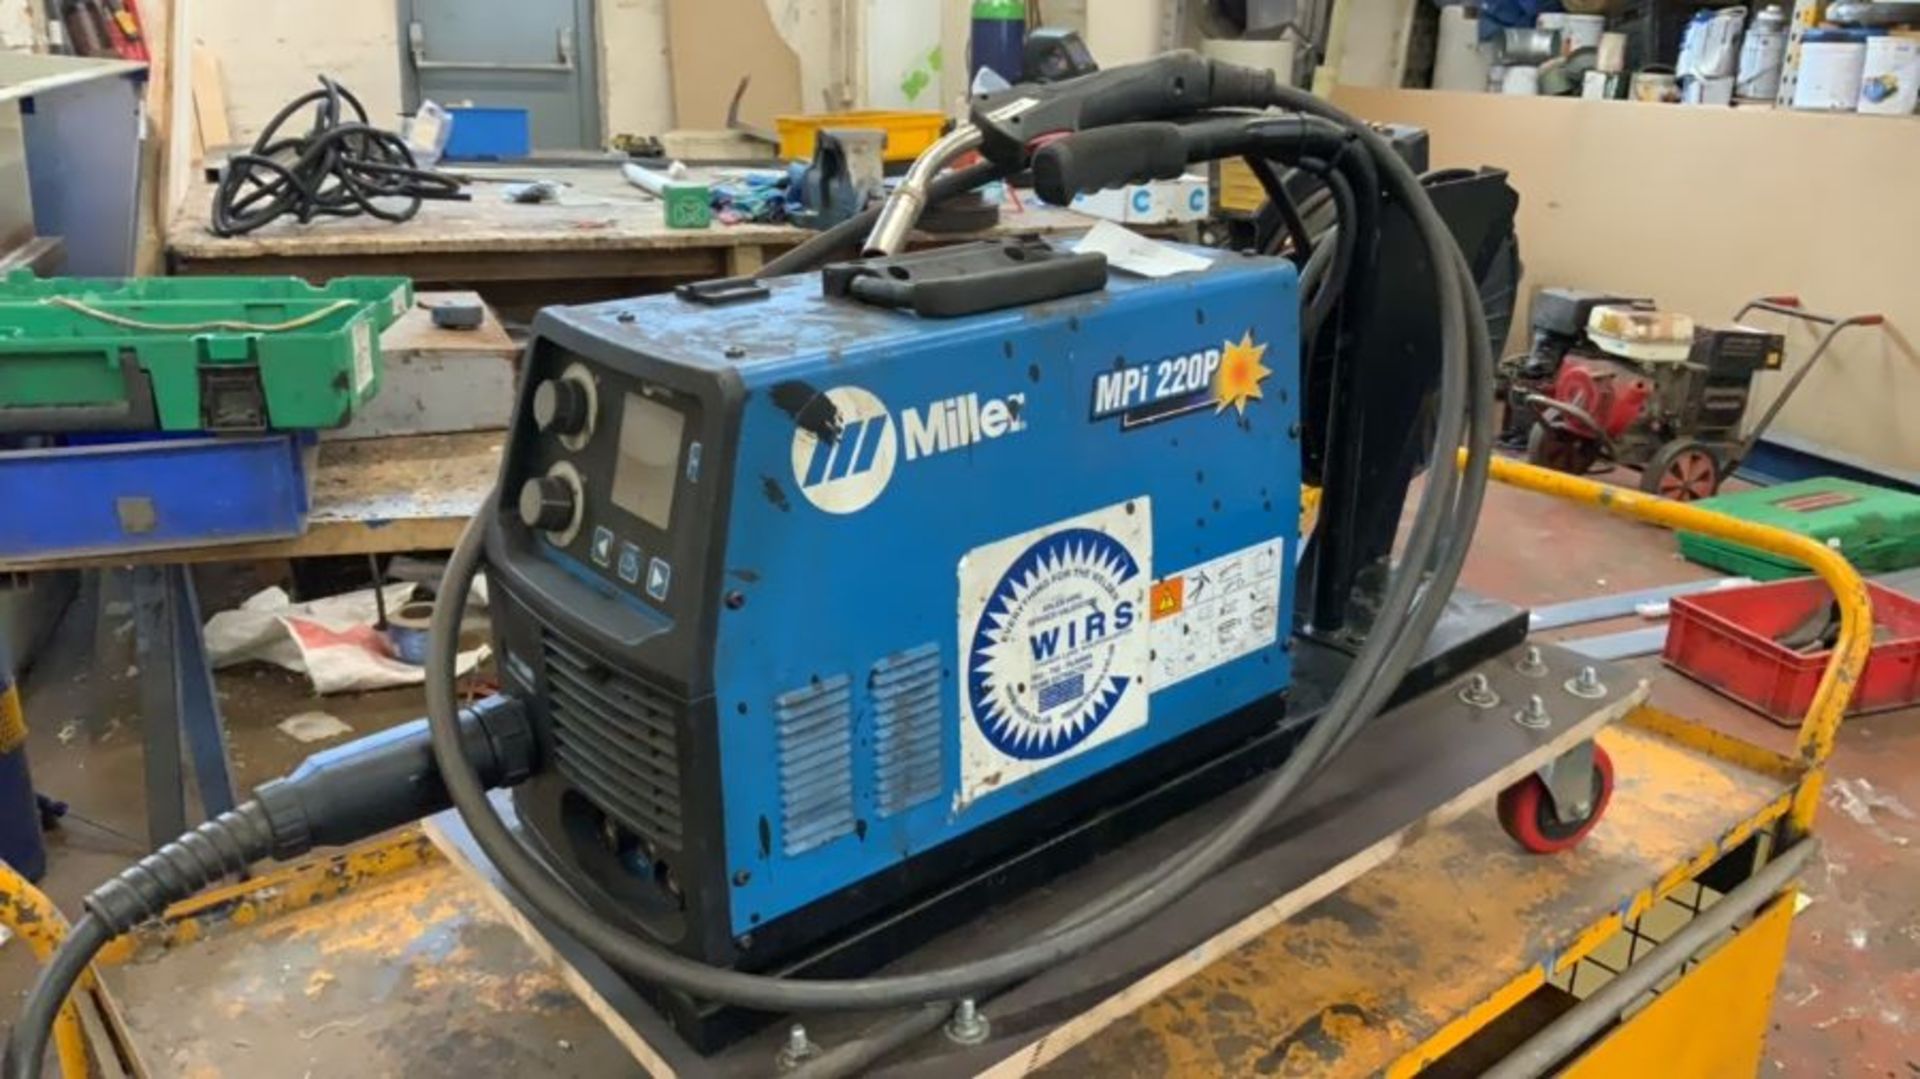 Miller MPi 2200P Mig Inverter, Serial No.MB46707D mounted on wooden trolley, does not include yellow